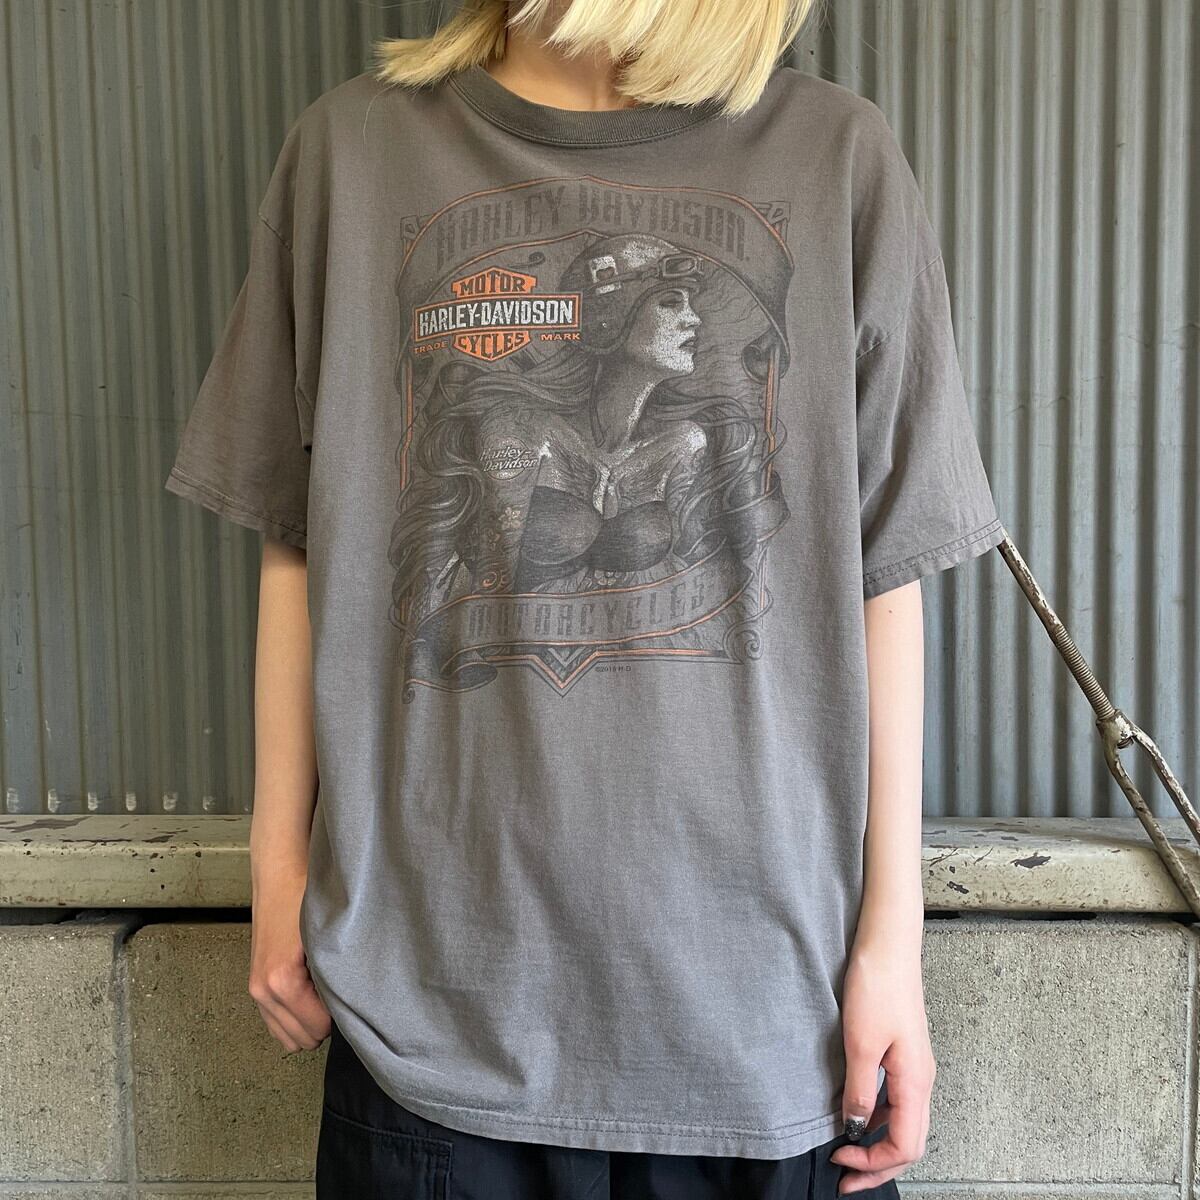 Harley-Davidson ハーレーダビッドソン 両面プリント Tシャツ メンズL 古着 モーターサイクル バイクTシャツ ロゴプリント  バックプリント グレー【Tシャツ】 | cave 古着屋【公式】古着通販サイト powered by BASE